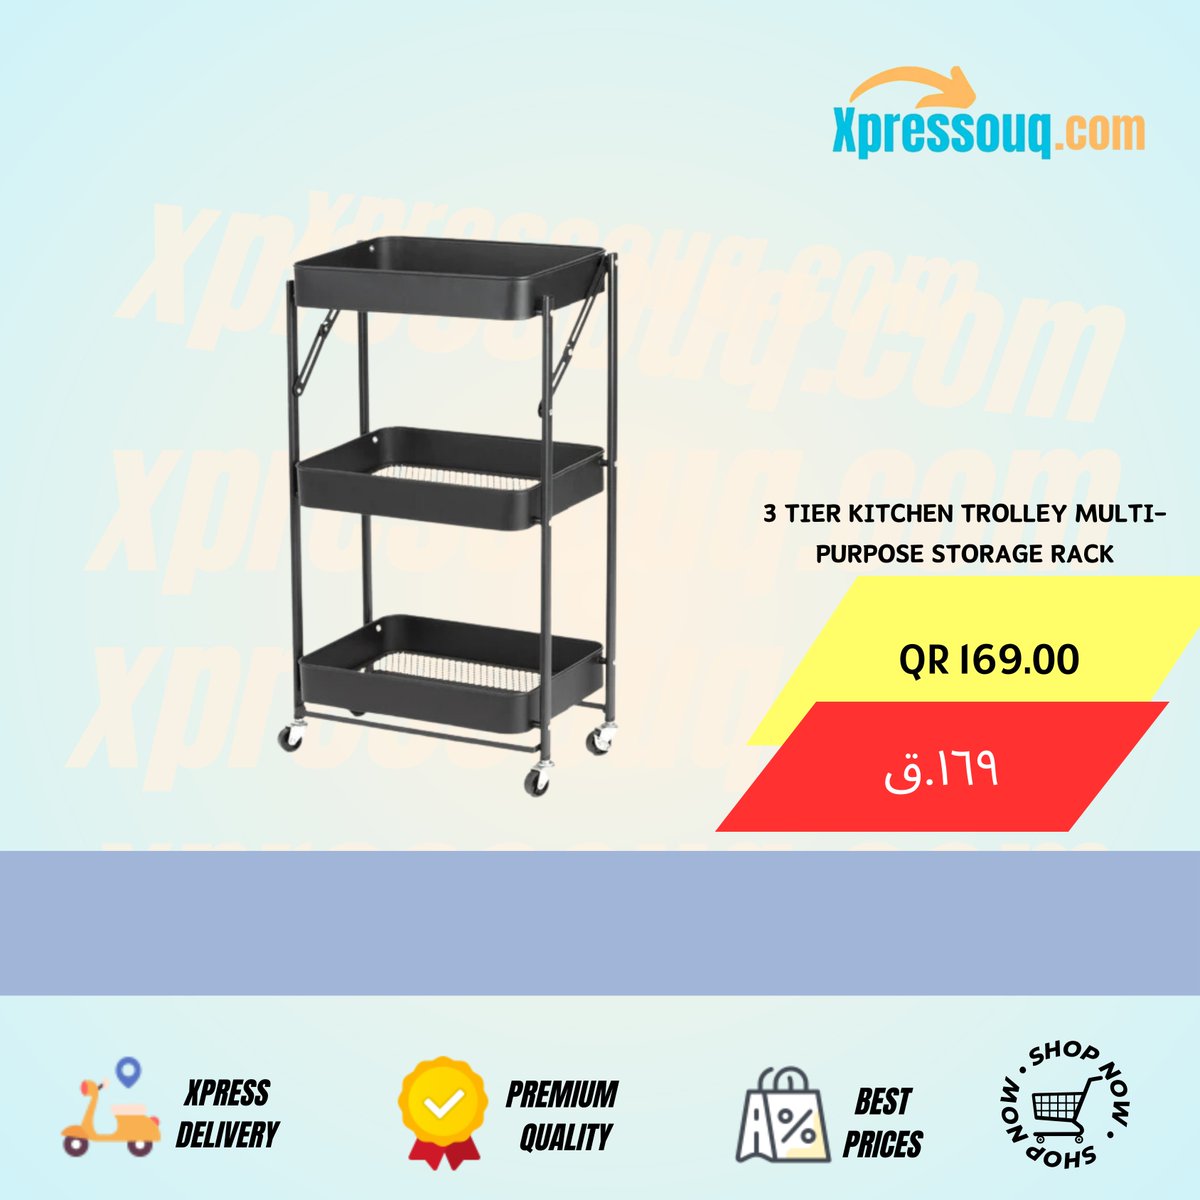 Tidy Trolley: 3 Tier Magic

🎯Order Now @ Just QR 169 only 🏃🏻‍
💸Cash on Delivery💸
🚗xpress Delivery🛻

xpressouq.com/products/3-tie…

#KitchenTrolley #MultiPurposeStorage #QatarHome #OrganizationEssentials #QatarLiving #KitchenOrganization #StorageSolutions #QatarLife